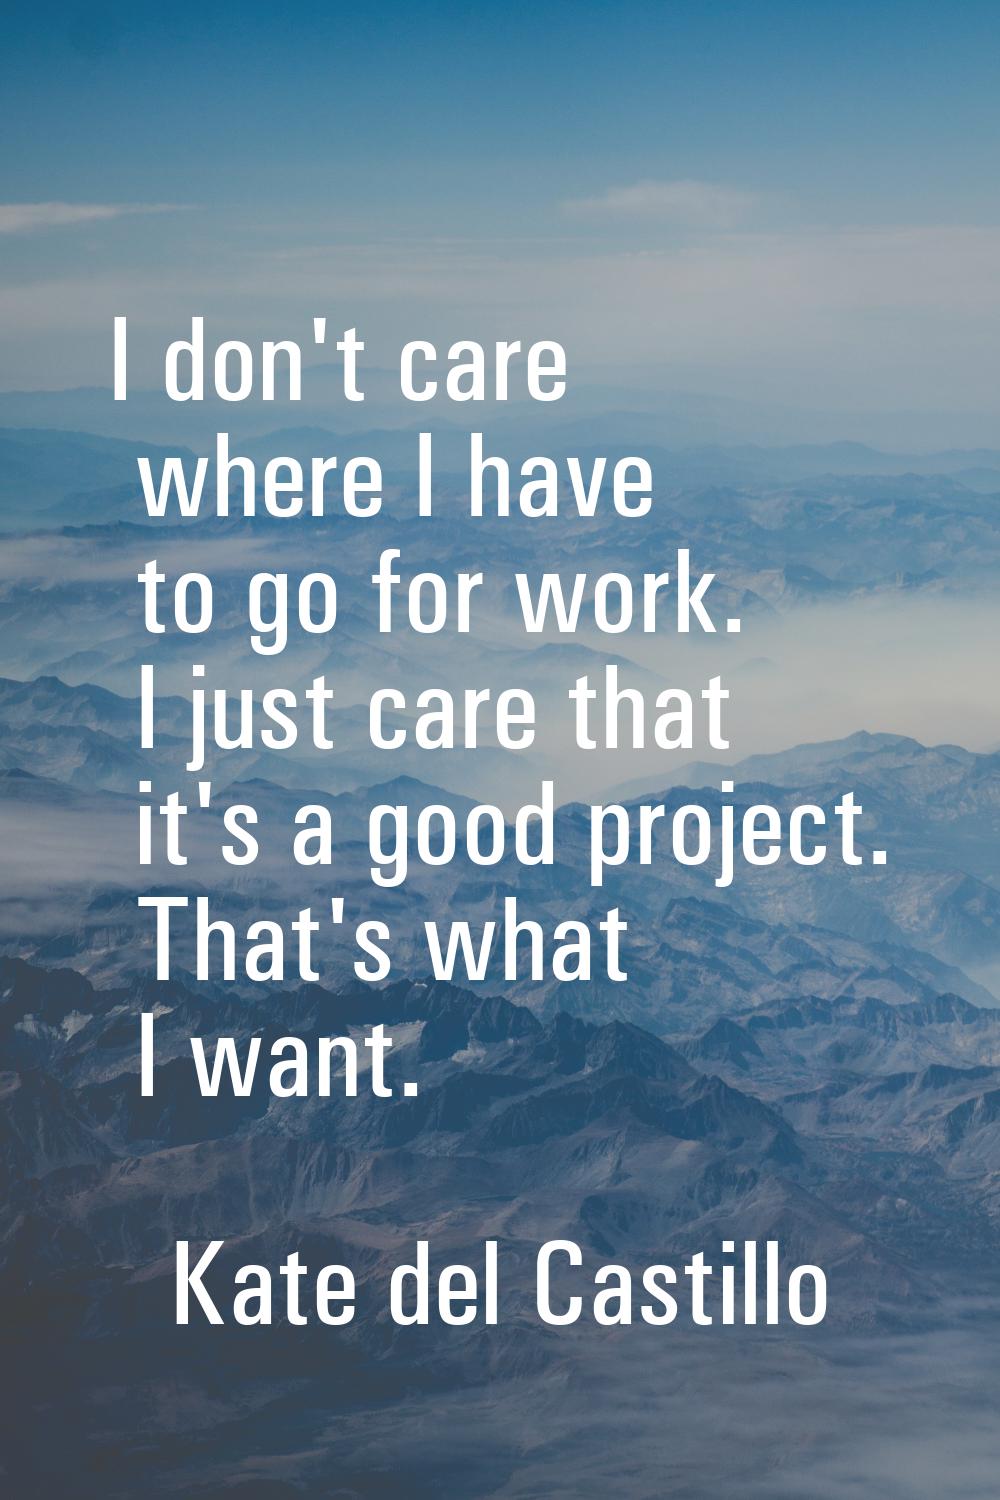 I don't care where I have to go for work. I just care that it's a good project. That's what I want.